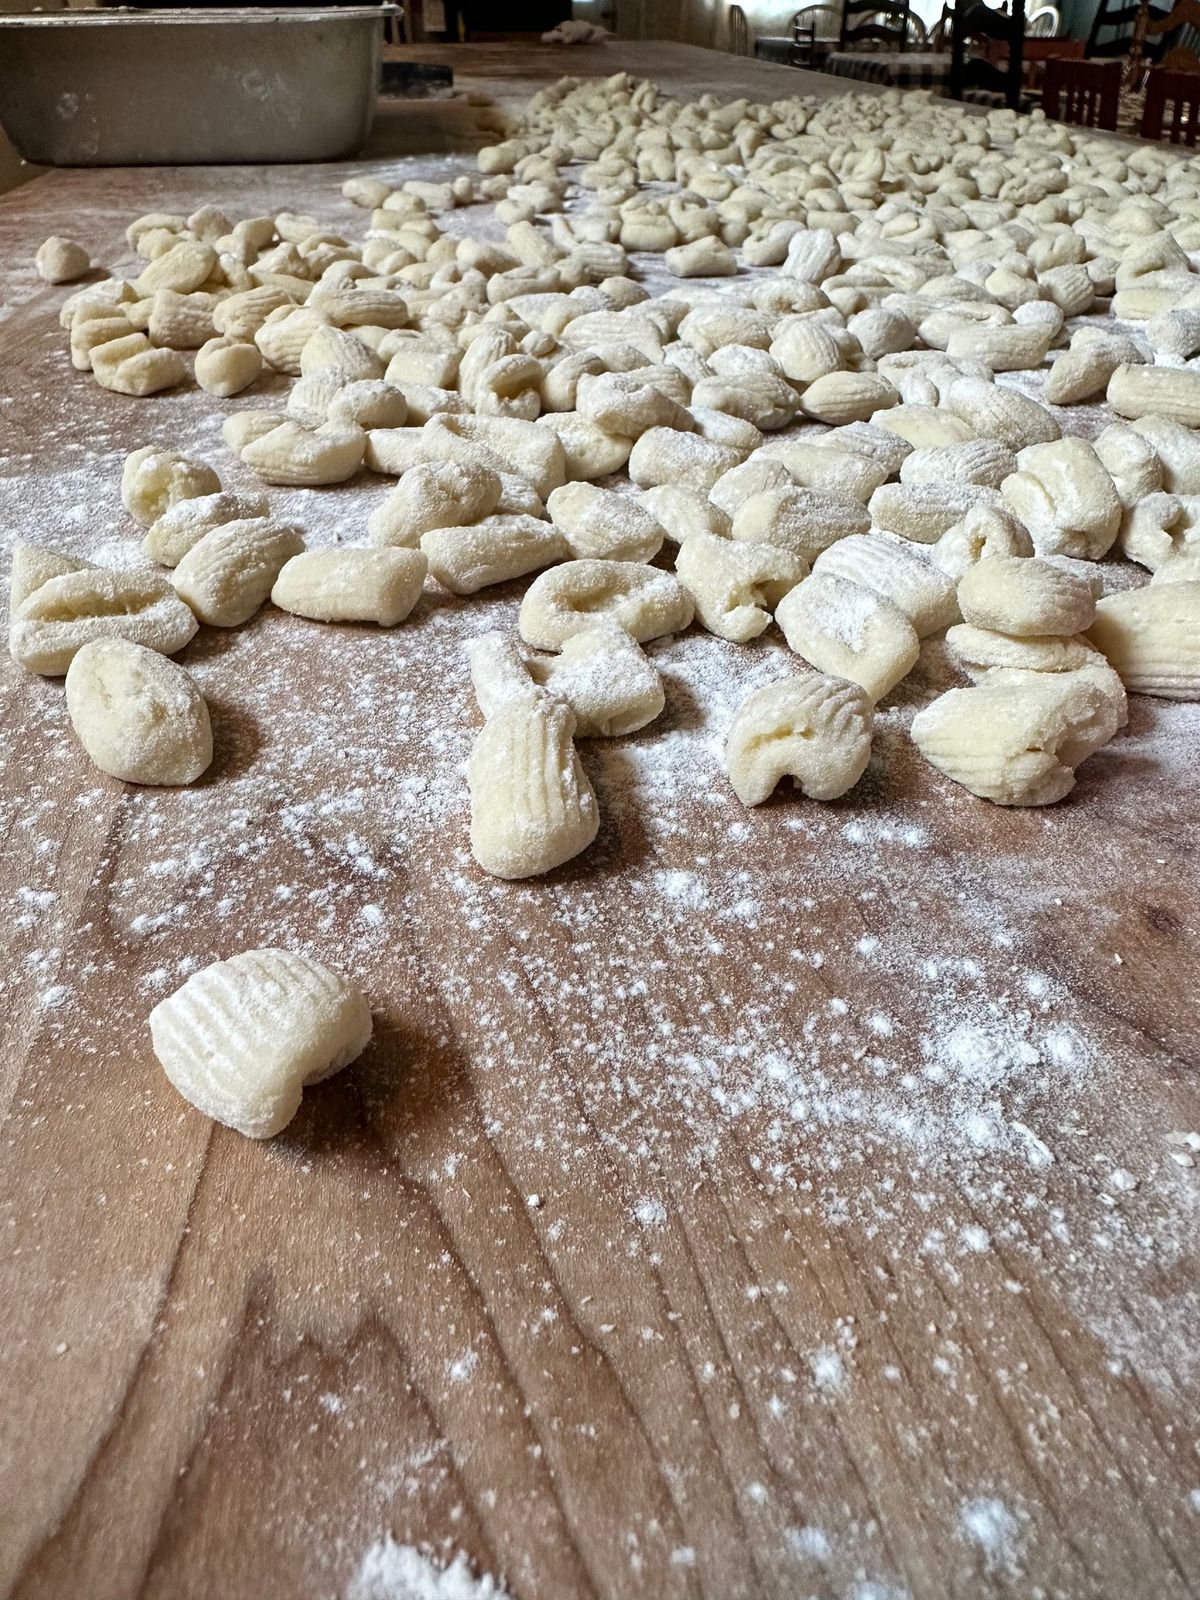 Gnocchi Class with Theresa Marie